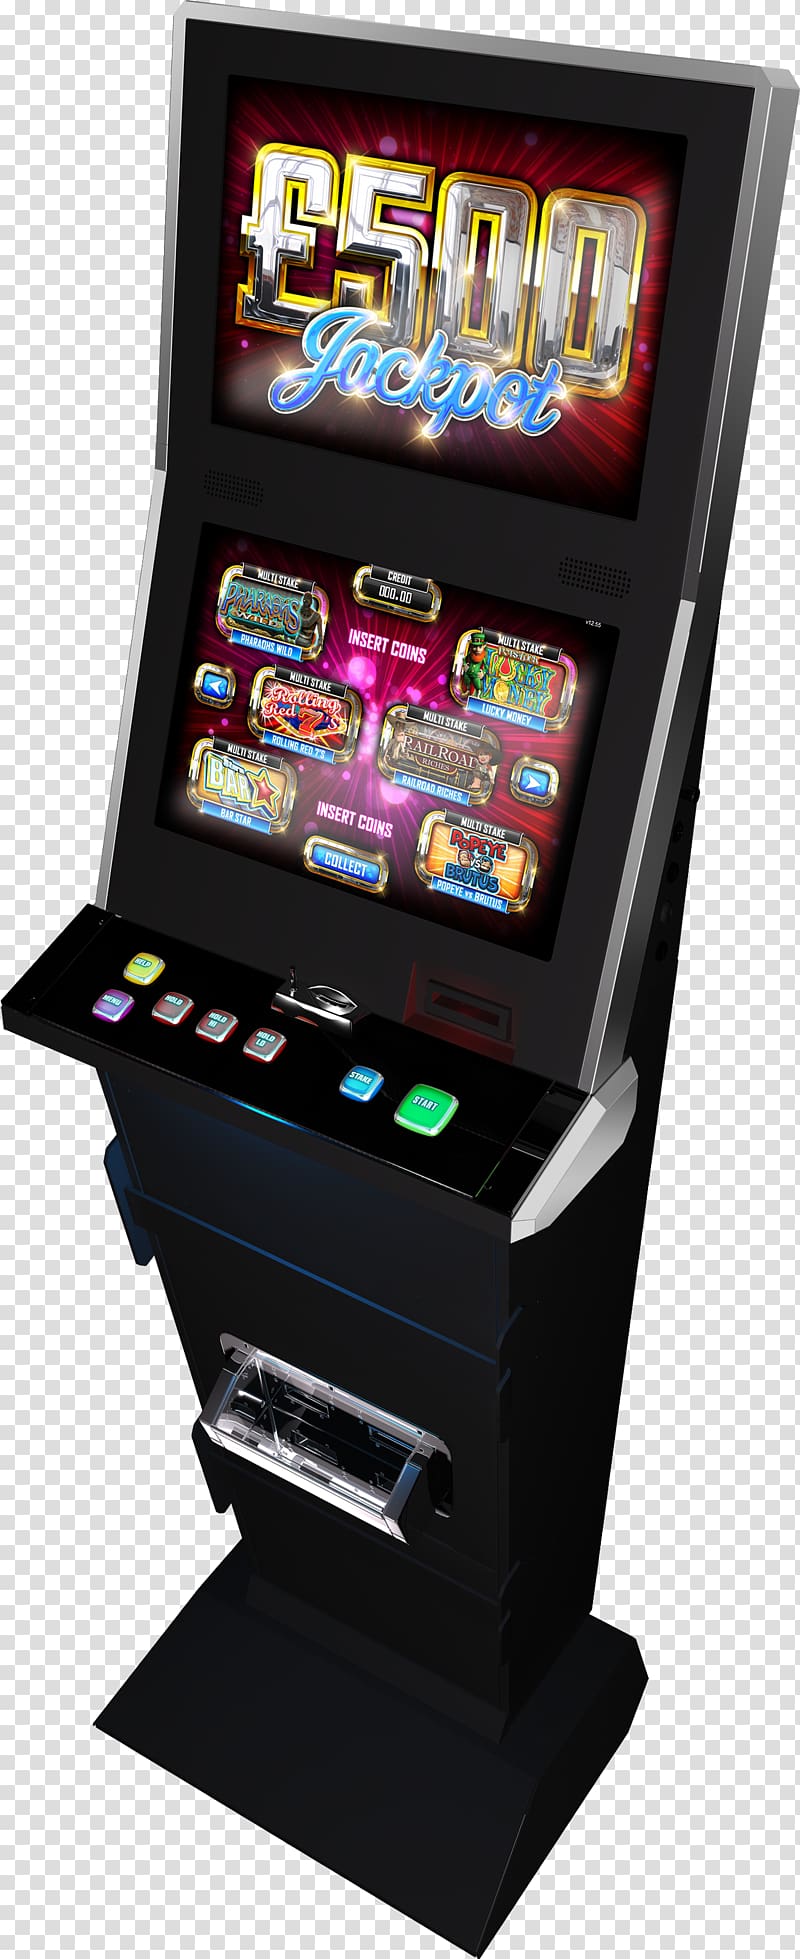 Arcade cabinet Lottery machine Slot machine Game, machine factory transparent background PNG clipart